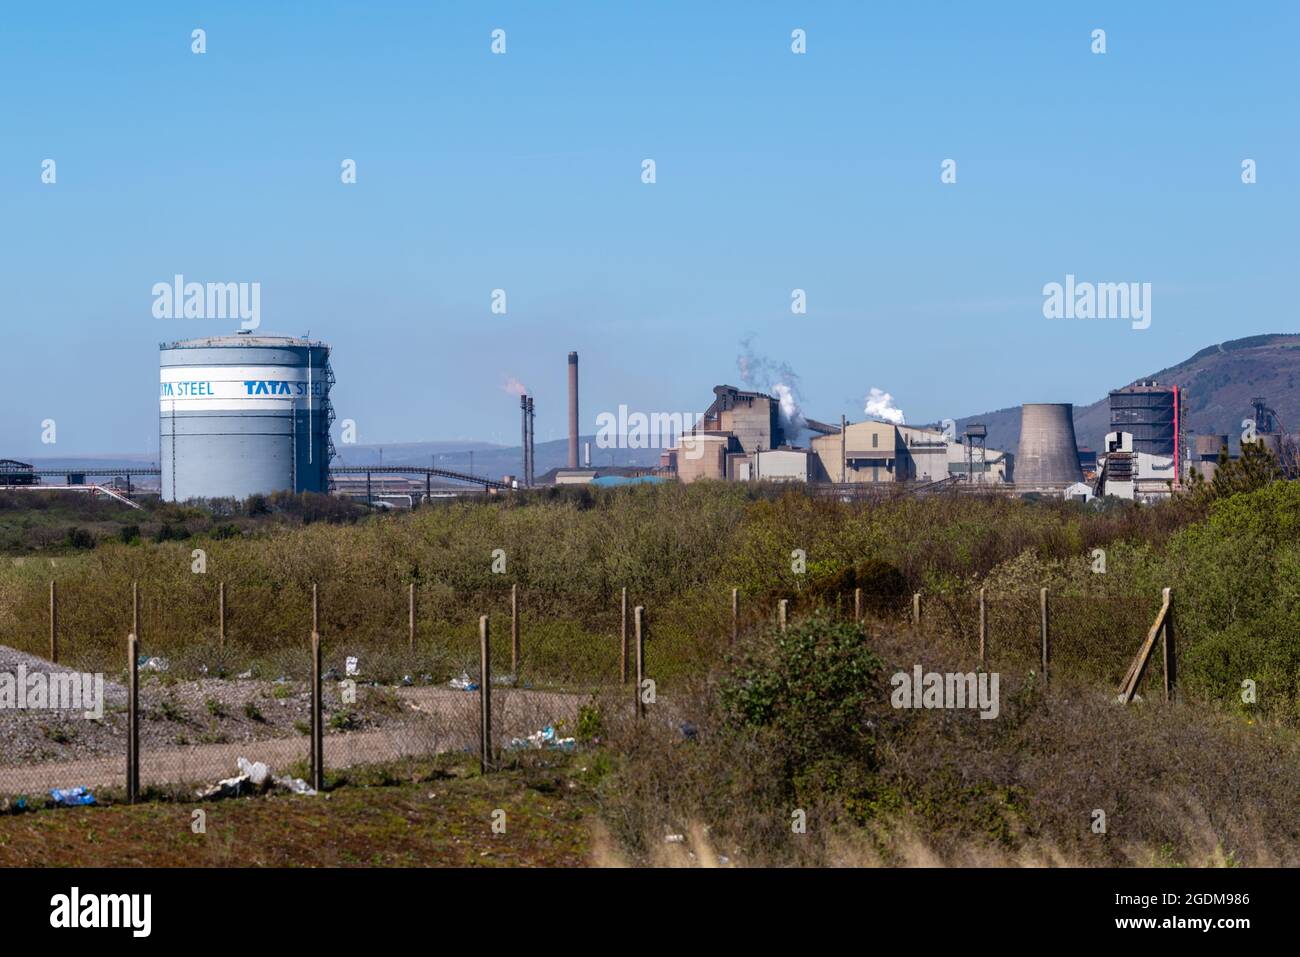 Port Talbot (Tata) steel works with scub land in foreground Stock Photo